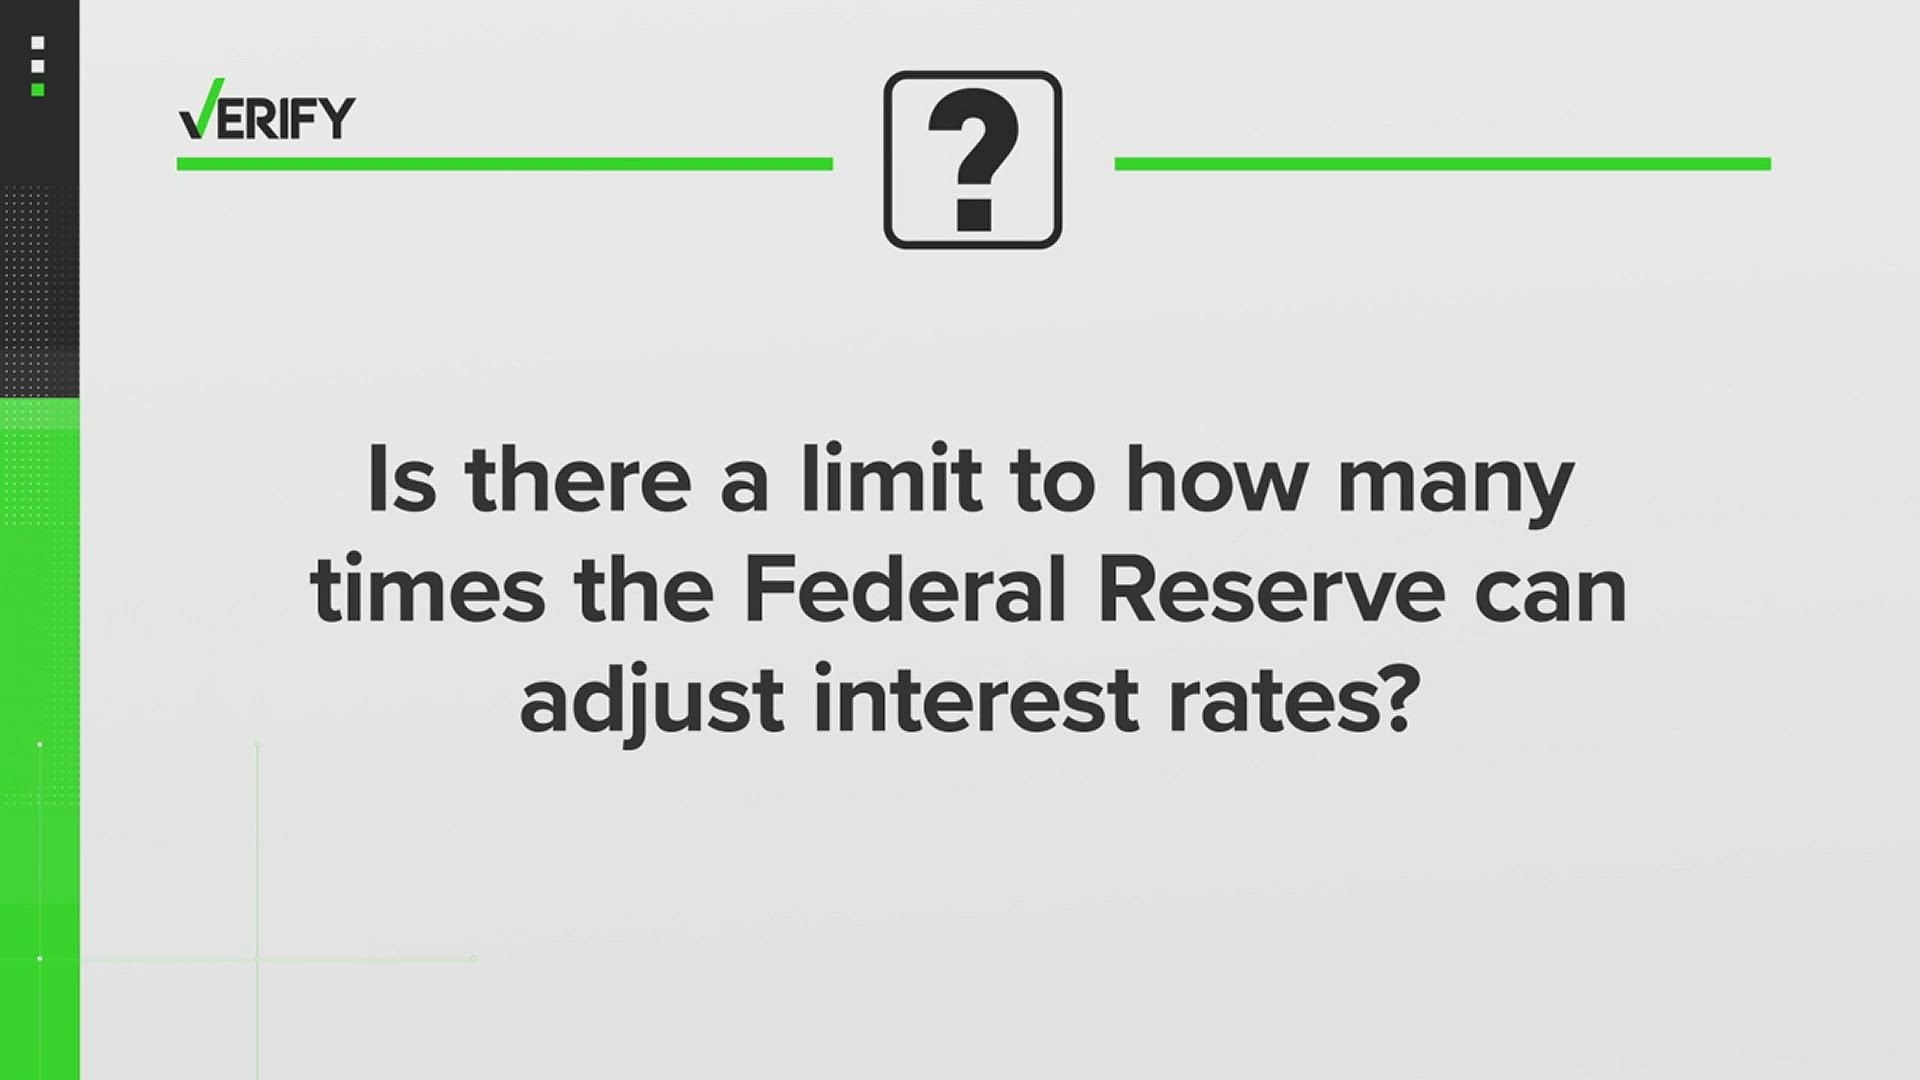 The Federal Reserve can raise rates as many times as needed in an effort to help solve problems that the U.S. economy faces, such as inflation, experts told VERIFY.